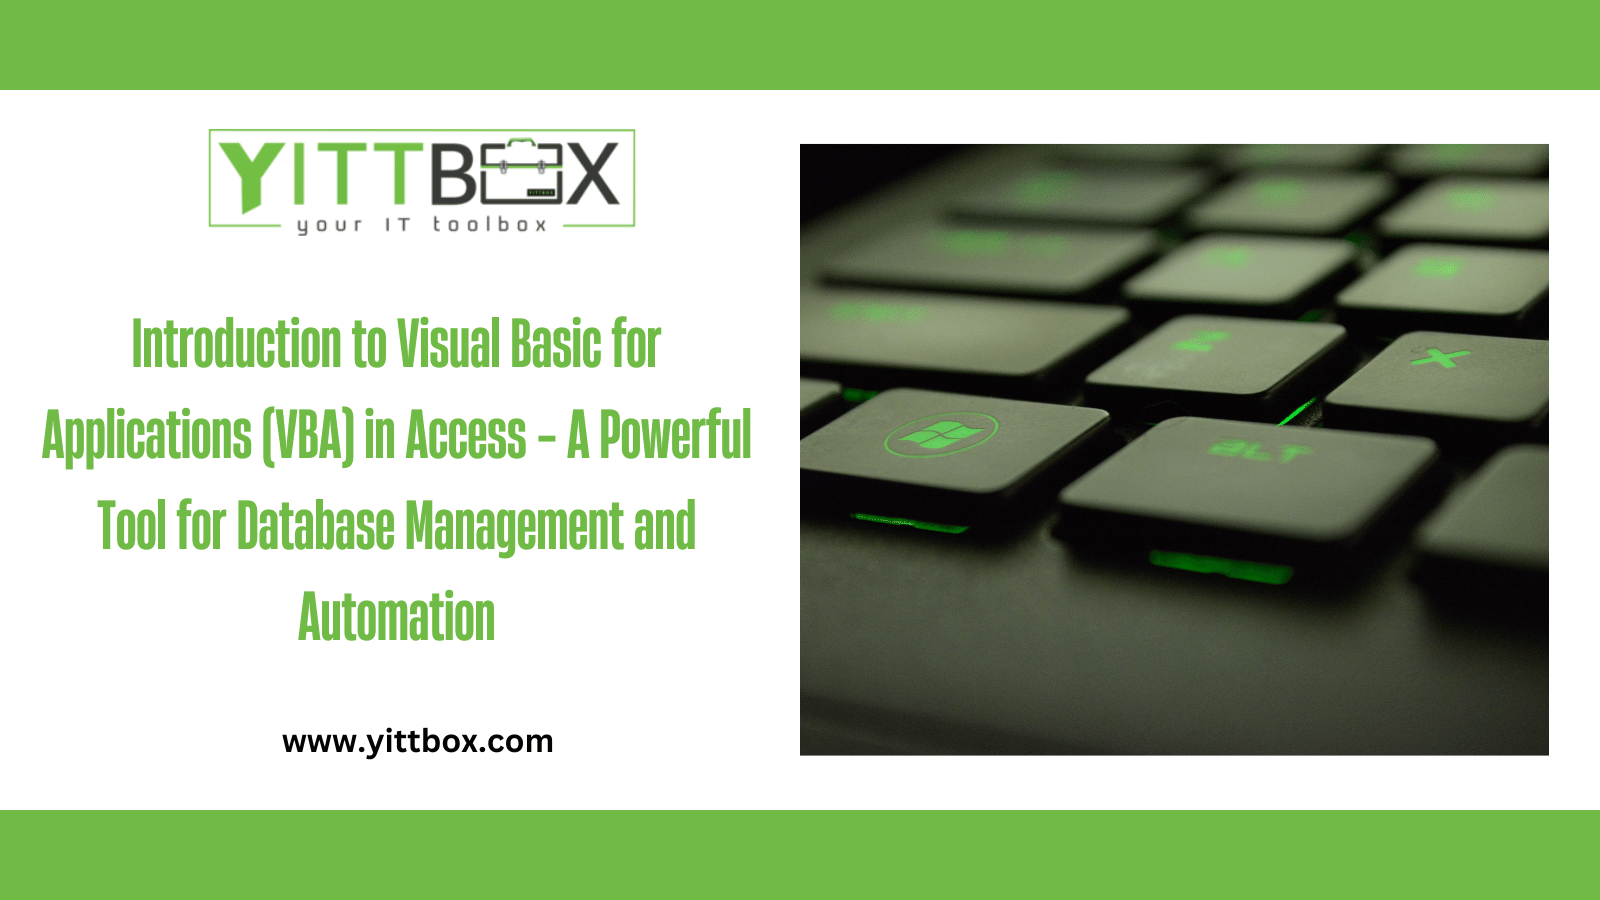 Introduction to Visual Basic for Applications (VBA) in Access - A Powerful Tool for Database Management and Automation